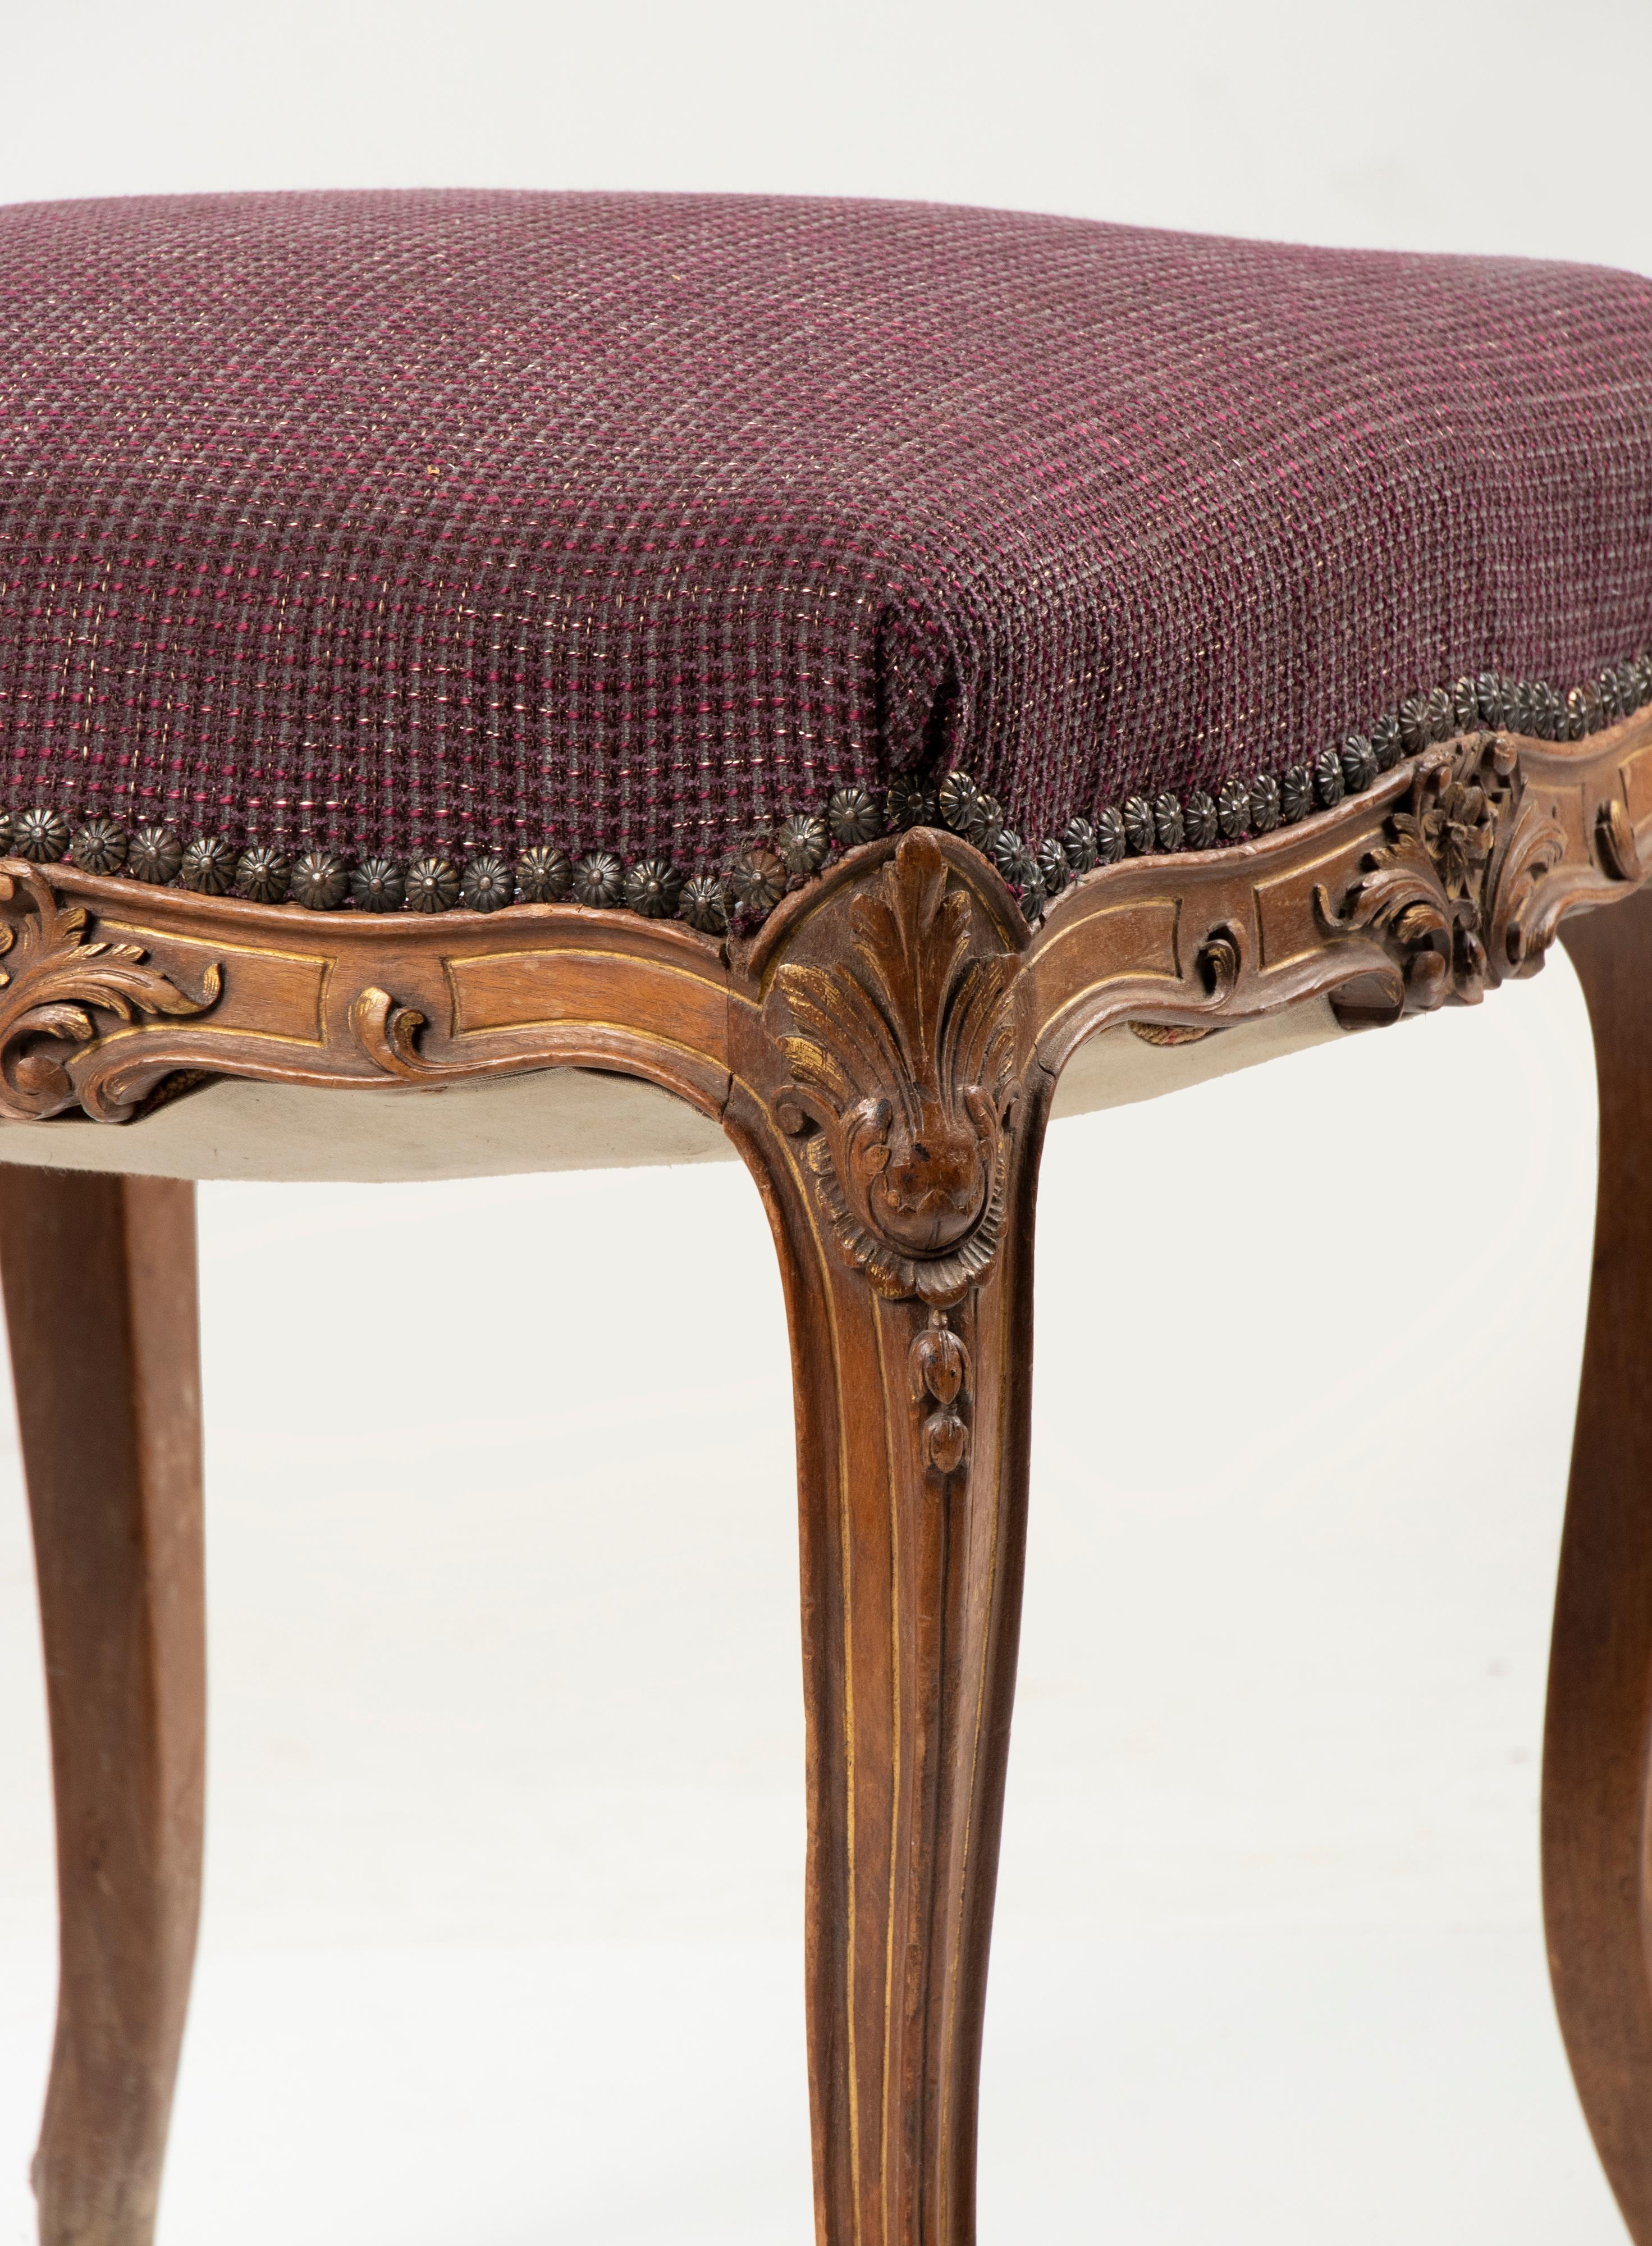 An antique hand carved footstool, made of solid walnut, in the French Régence style. Little gold-colored accents on the carving. The stool has been reupholstered with a deep red fabric. The seat has the original springs. Made in France, circa